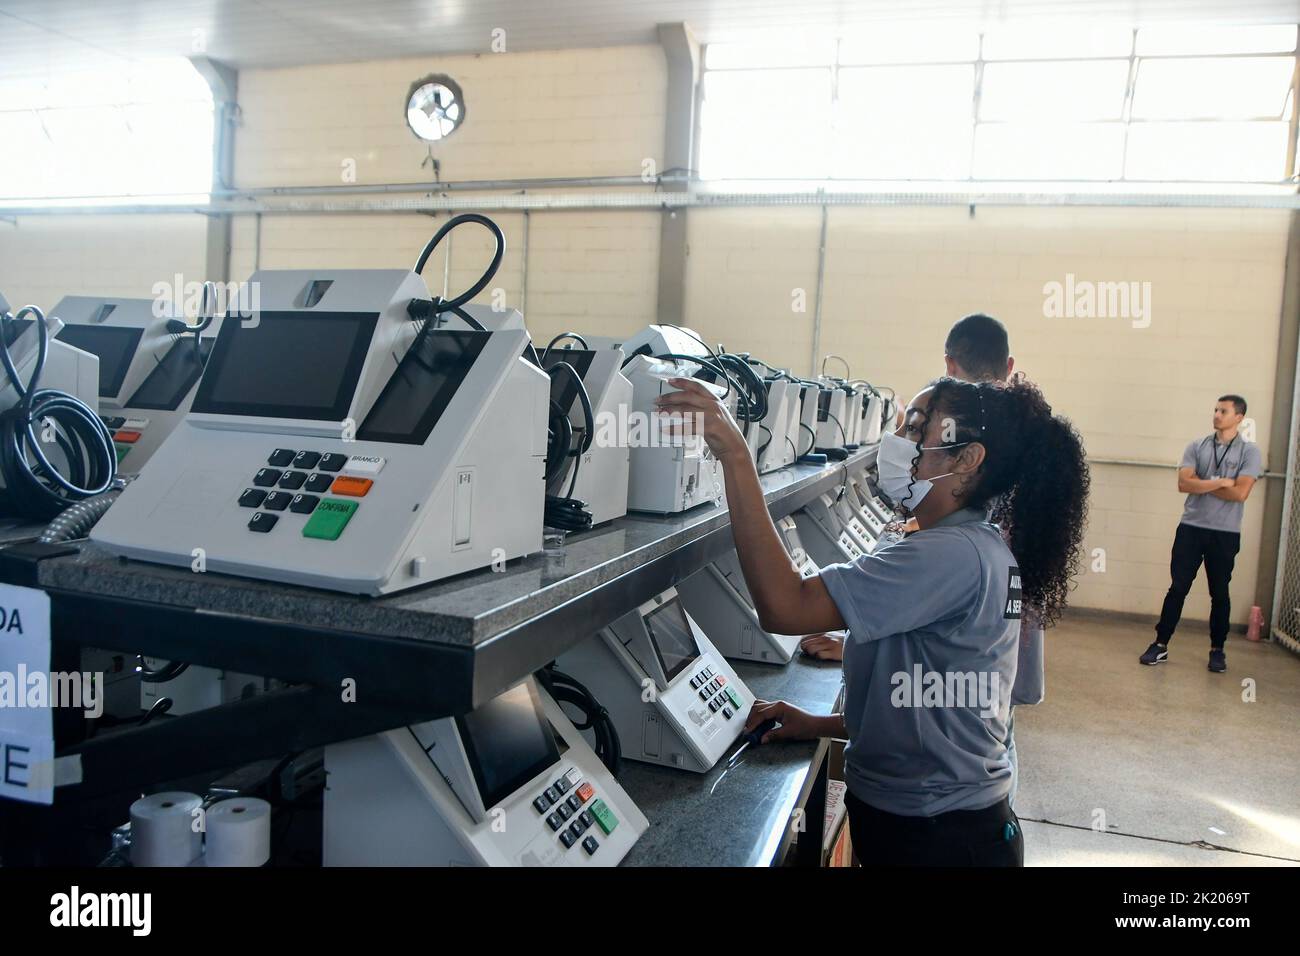 BRASÍLIA, DF - 21.09.2022: TRE REALIZA LACRAÇÃO DAS URNAS ELETRÔNICAS - Photo, TRE employees reviewing the electronic voting machine. This Wednesday (21) the TRE of the Federal District began the process of sealing and putting in boxes the electronic ballot boxes to distribute in the region's elections. (Photo: Ton Molina/Fotoarena) Stock Photo